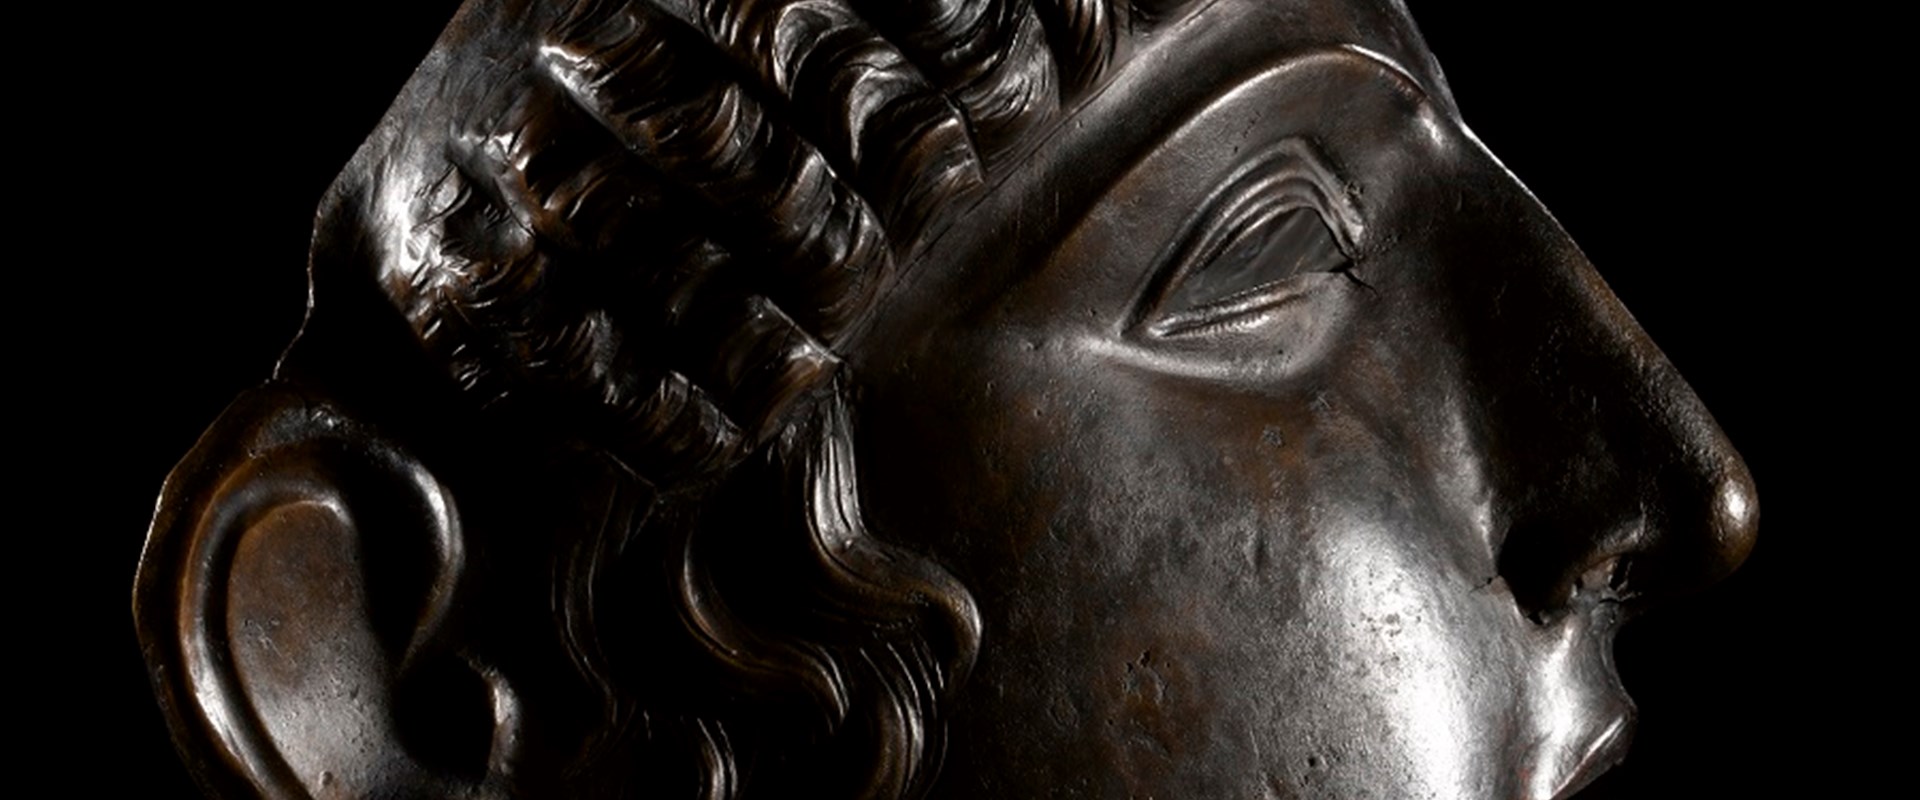 Profile view of bronze mask placed on a table. Light glints off its right cheek, and it bears a dignified expression.